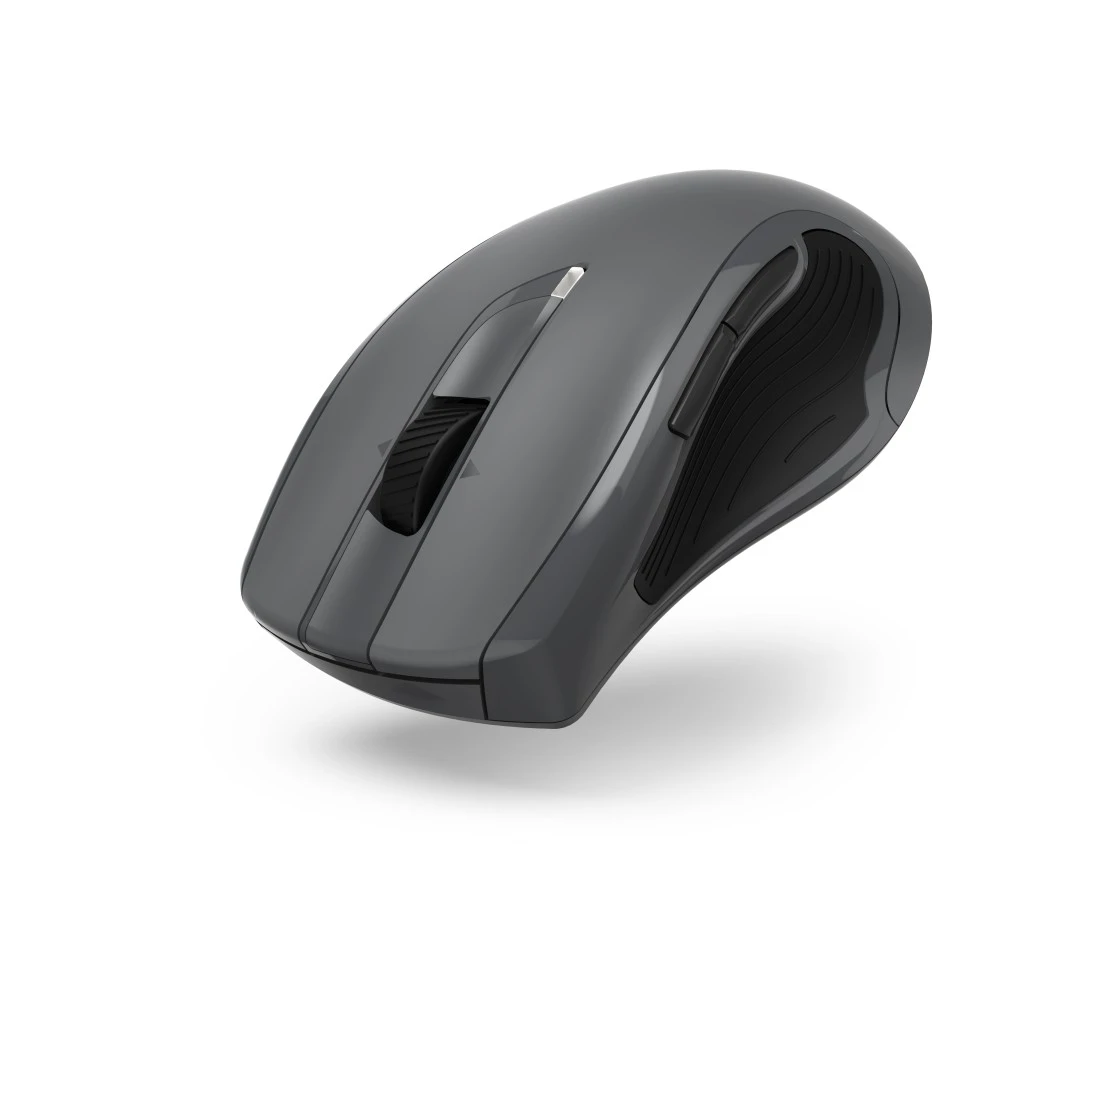 You Recently Viewed Hama 00173016 MW-900 V2 7-Button Laser Wireless Mouse, dark grey Image